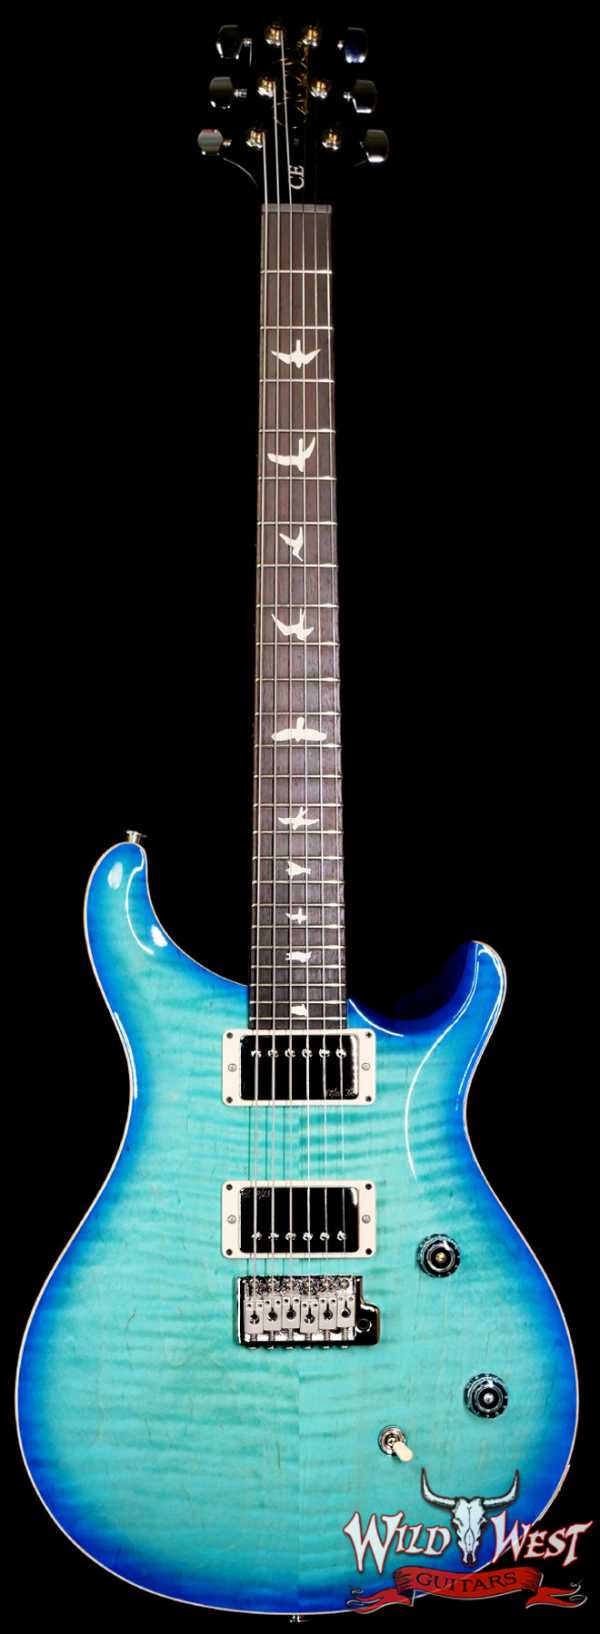 Paul Reed Smith PRS Wild West Guitars Special Run CE 24 Painted Black Neck 57/08 Covered Pickups Makena Blue 7.35 LBS